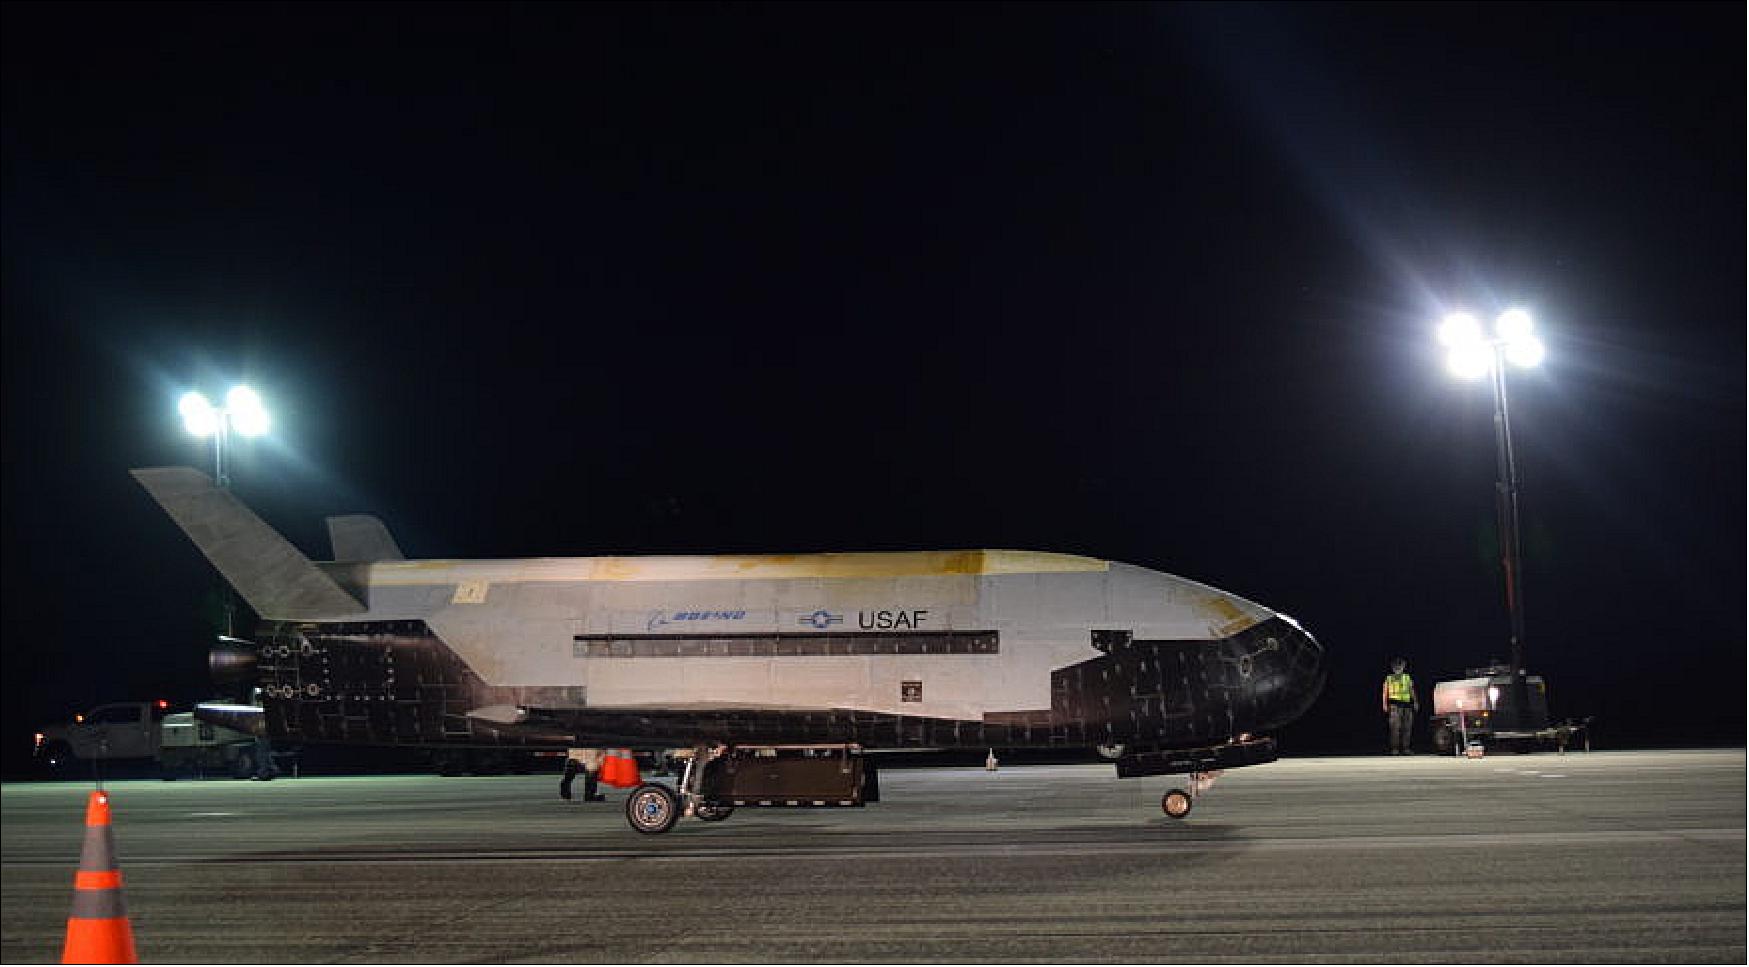 Figure 9: The Air Force X-37B spaceplane landed at NASA’s Kennedy Space Center Shuttle Landing Facility on Oct. 27, 2019 (image credit: USAF)